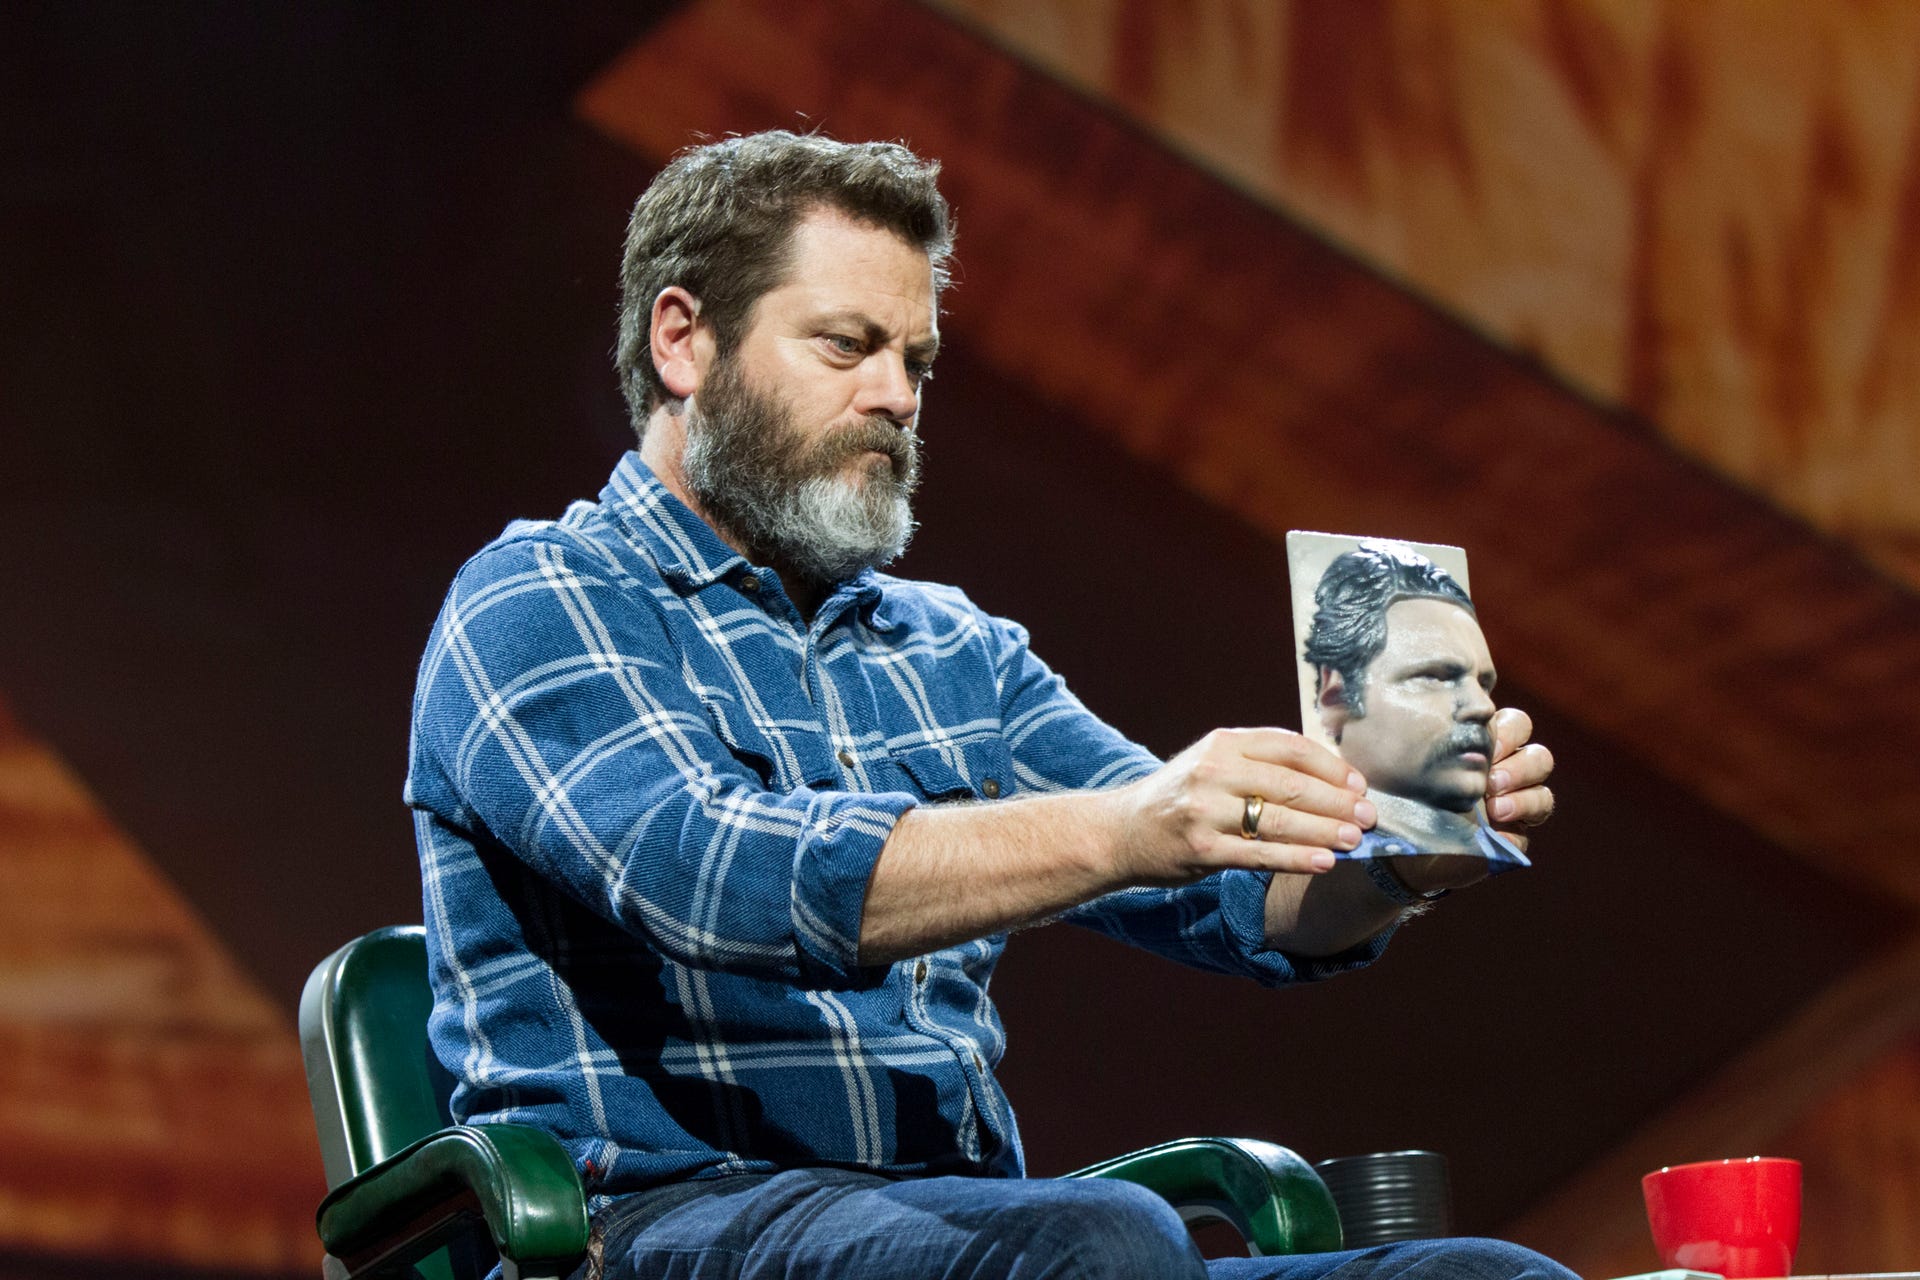 At Adobe's Max conference, Parks and Recreation actor Nick Offerman holds a 3D-printed model of his head reconstructed from a photo.